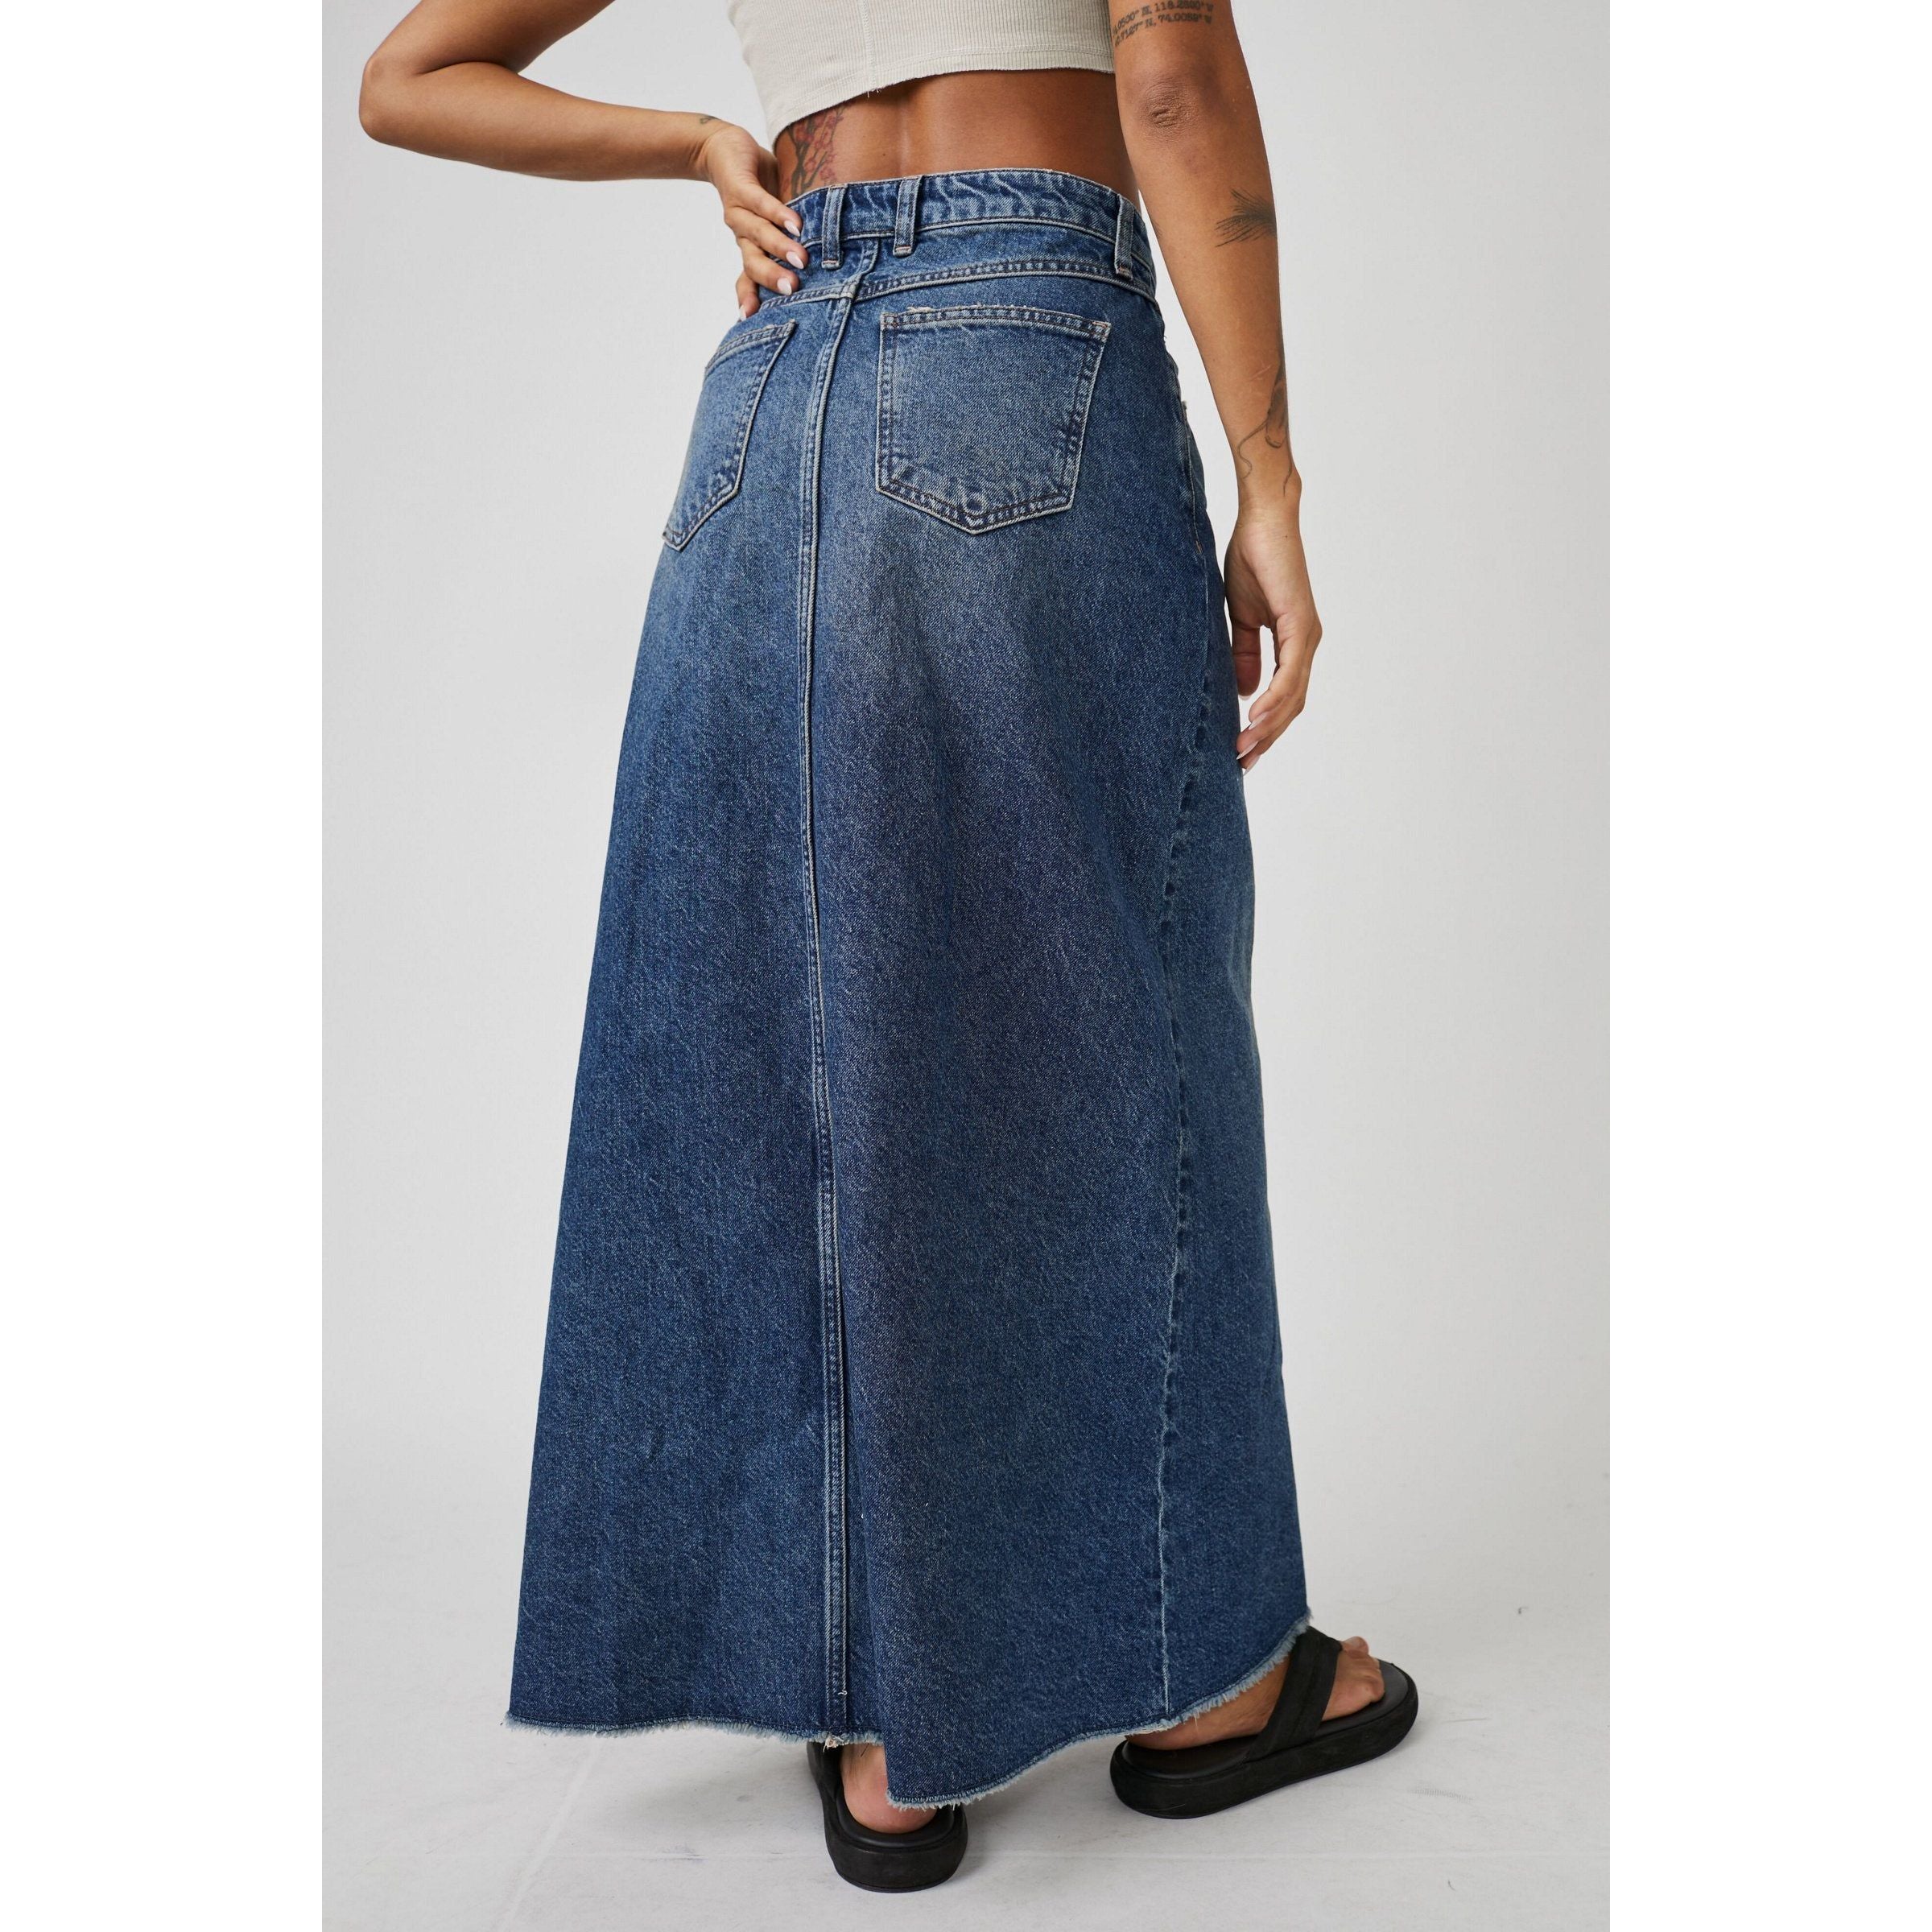 Free People - Come As You Are Denim Maxi Skirt in Dark Indigo-SQ1164818